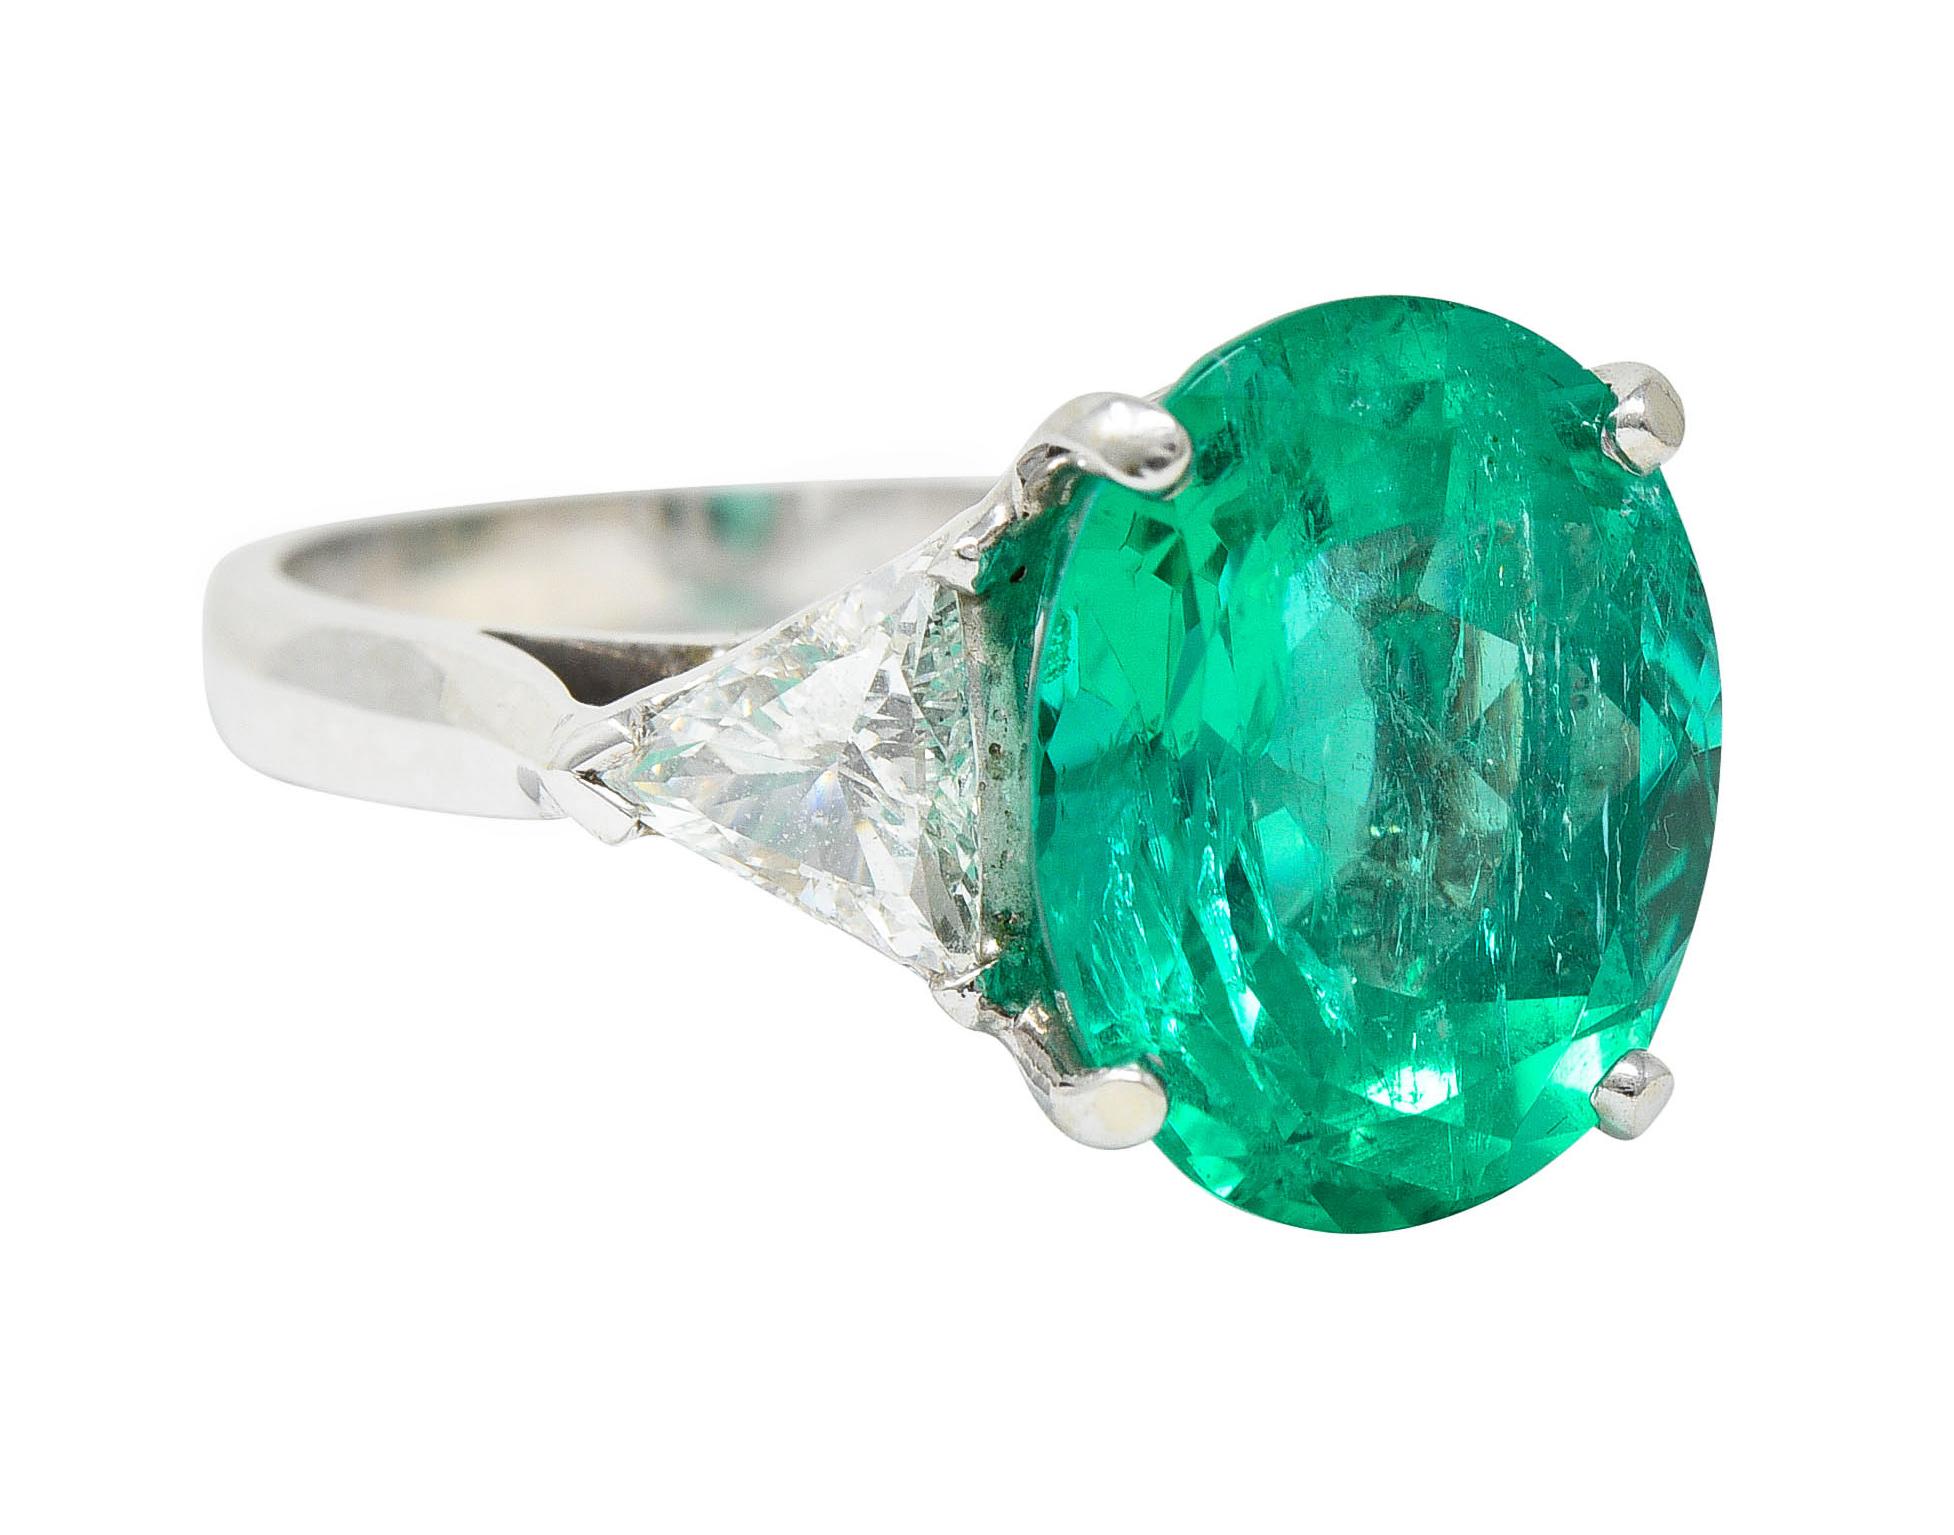 Featuring an oval brilliant cut emerald weighing approximately 6.00 carats

Colombian in origin with striking green color

Semi-transparent with natural inclusions and very minor clarity enhancement (F1)

Basket set and flanked by two trilliant cut